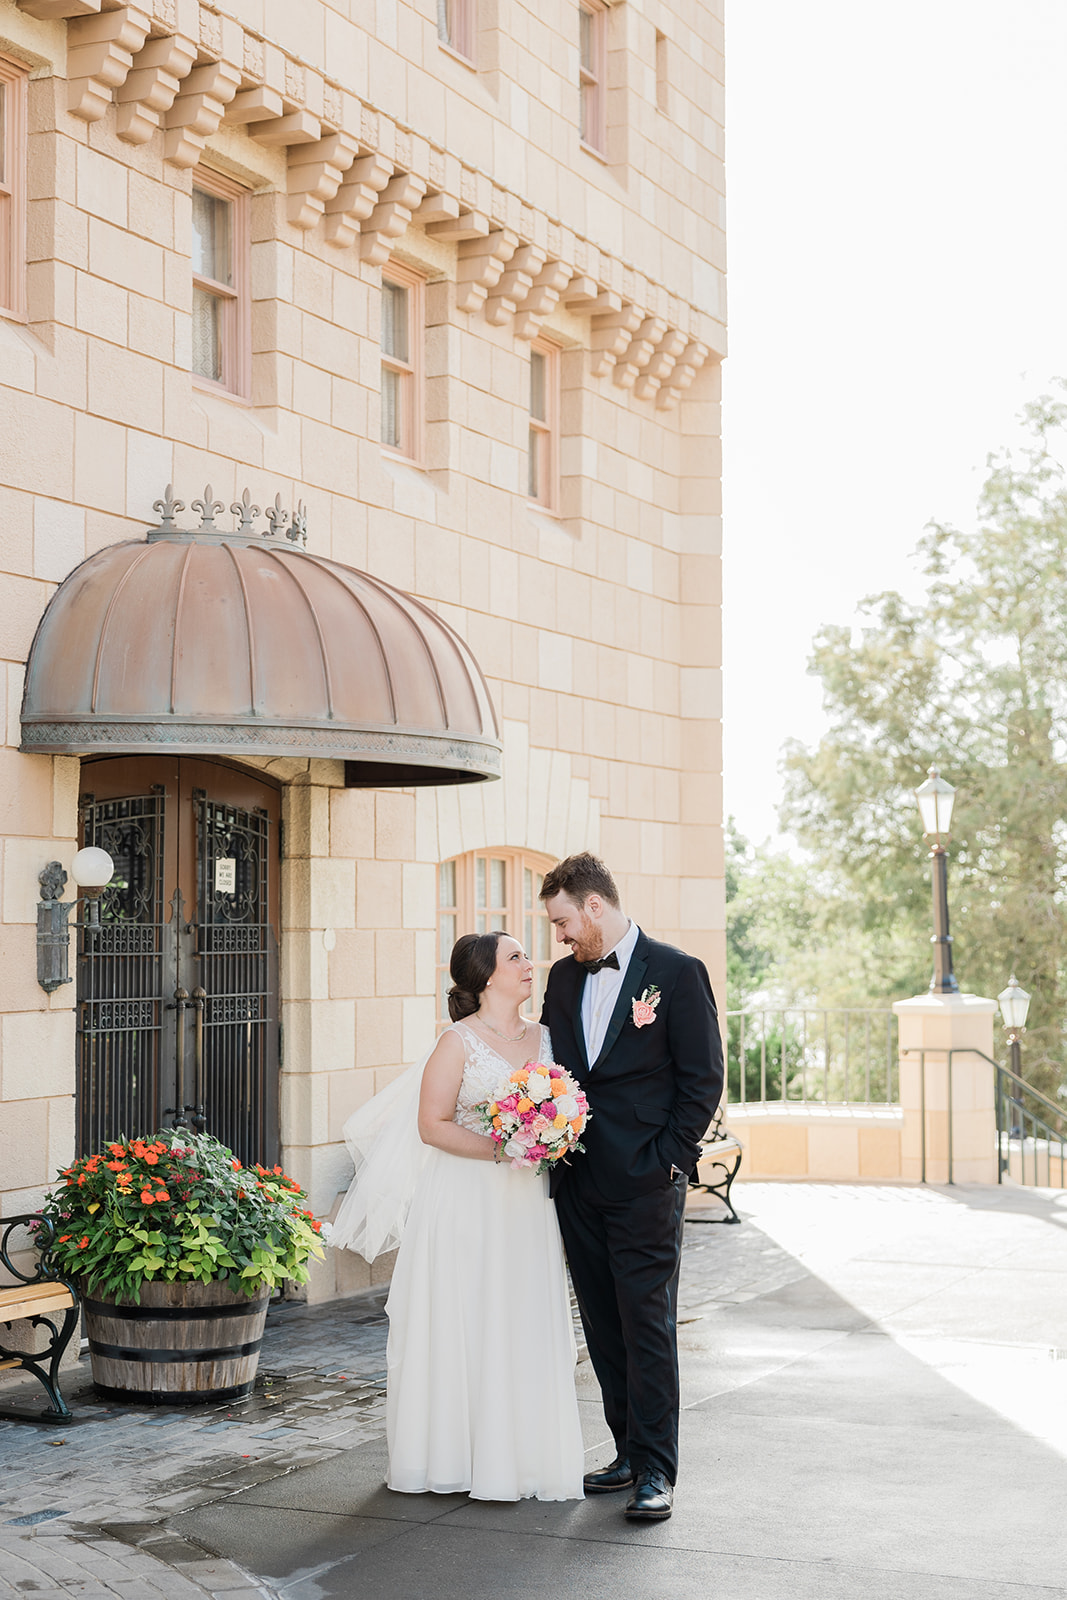 Couple wedding photos at the Canadian Pavilion at Disney Epcot by Jess Collin 